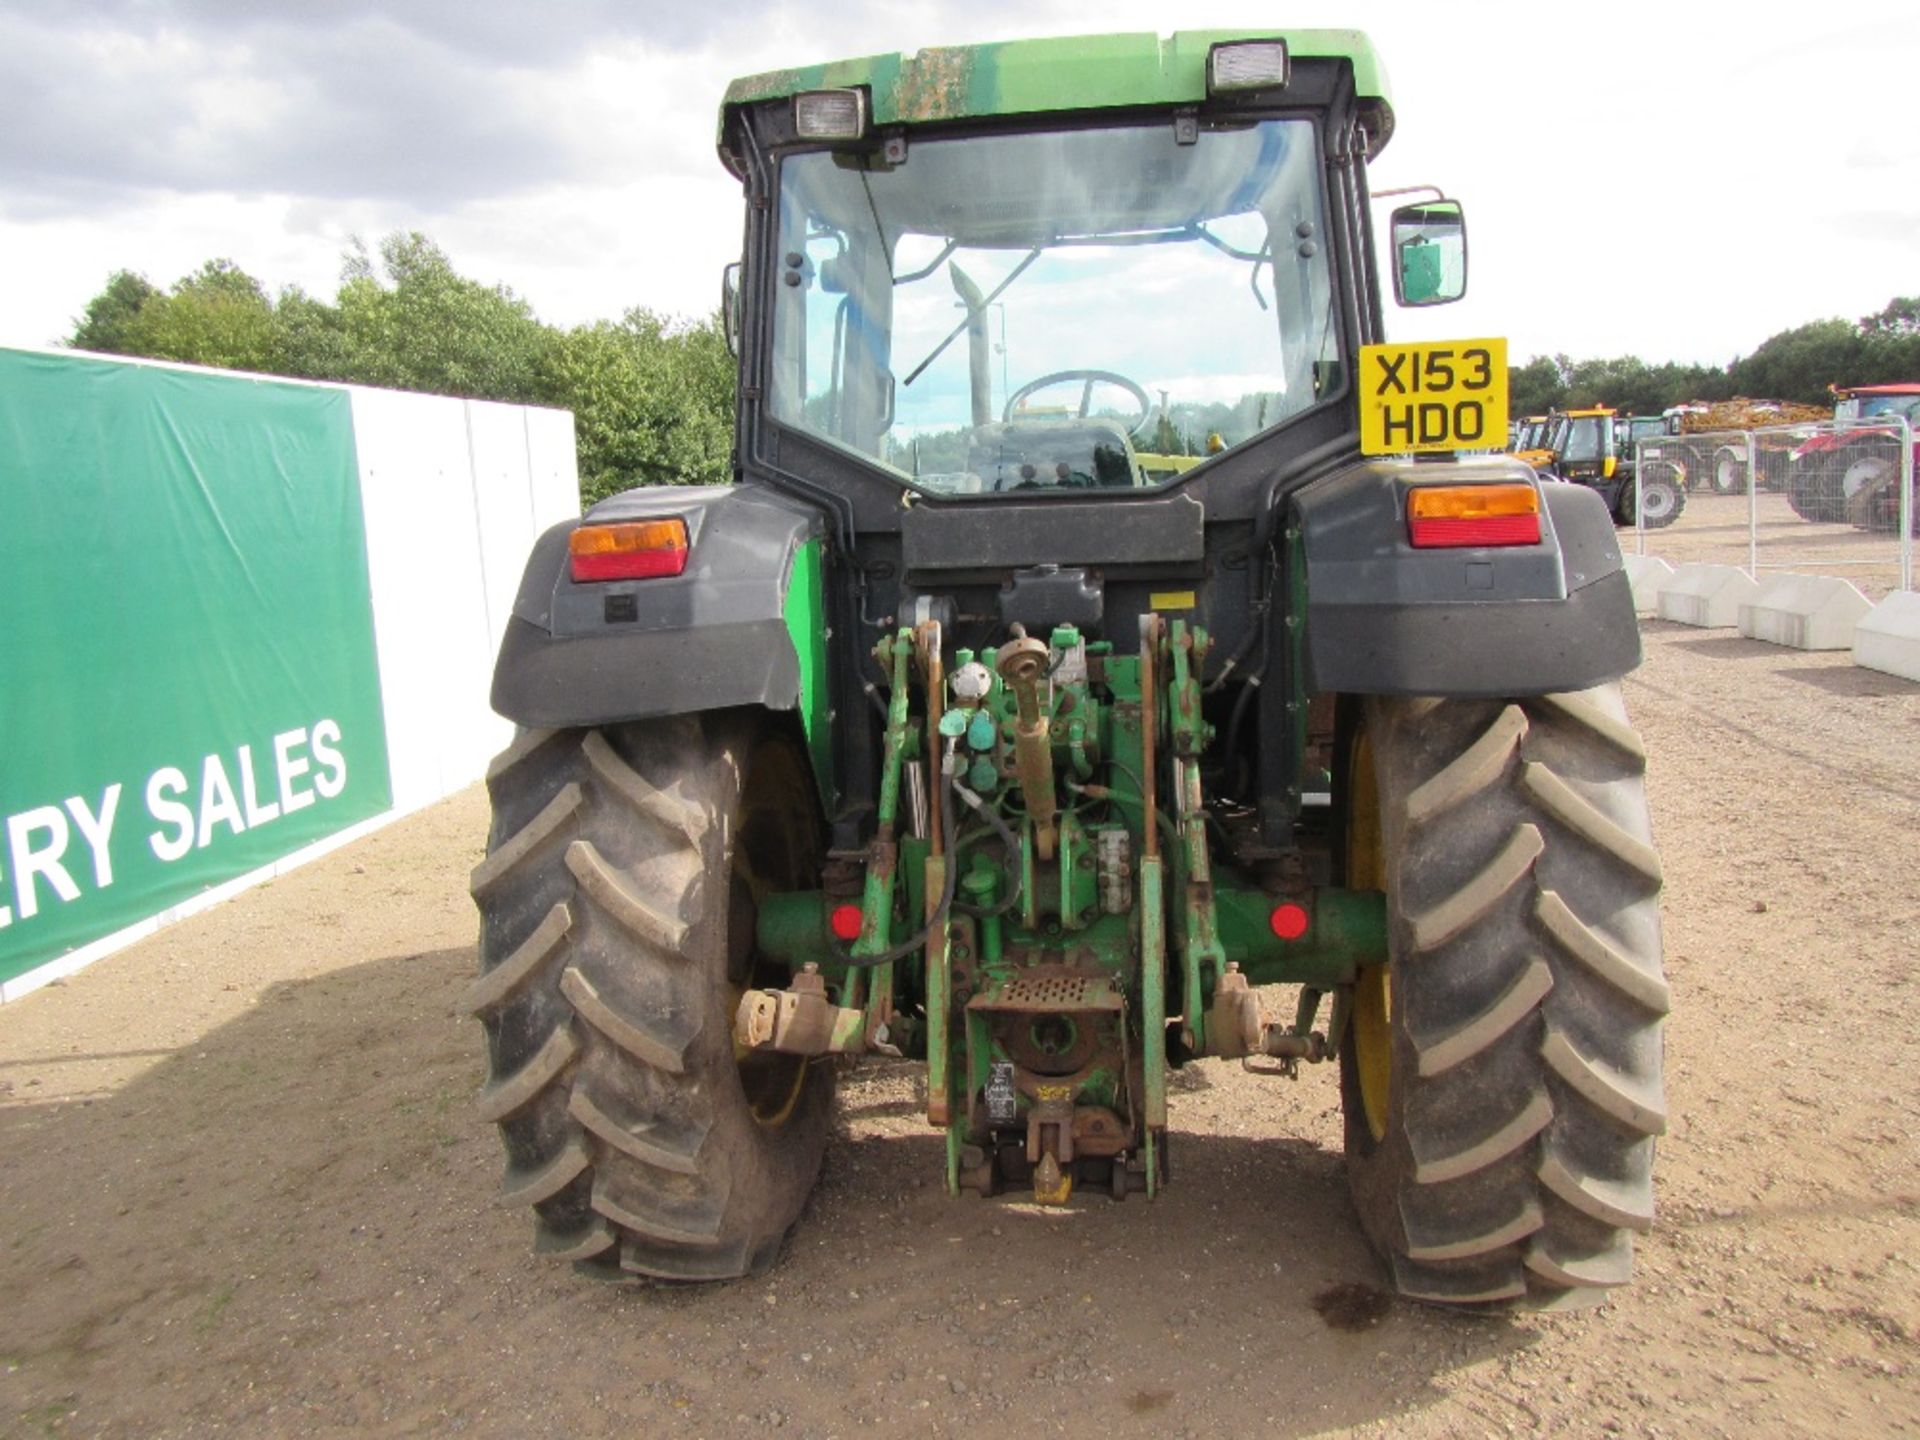 2000 John Deere 6010 4wd Tractor with Air Con & Creeper Gear. From Veg Rig. 4542 hrs. Reg No X153 - Image 6 of 17